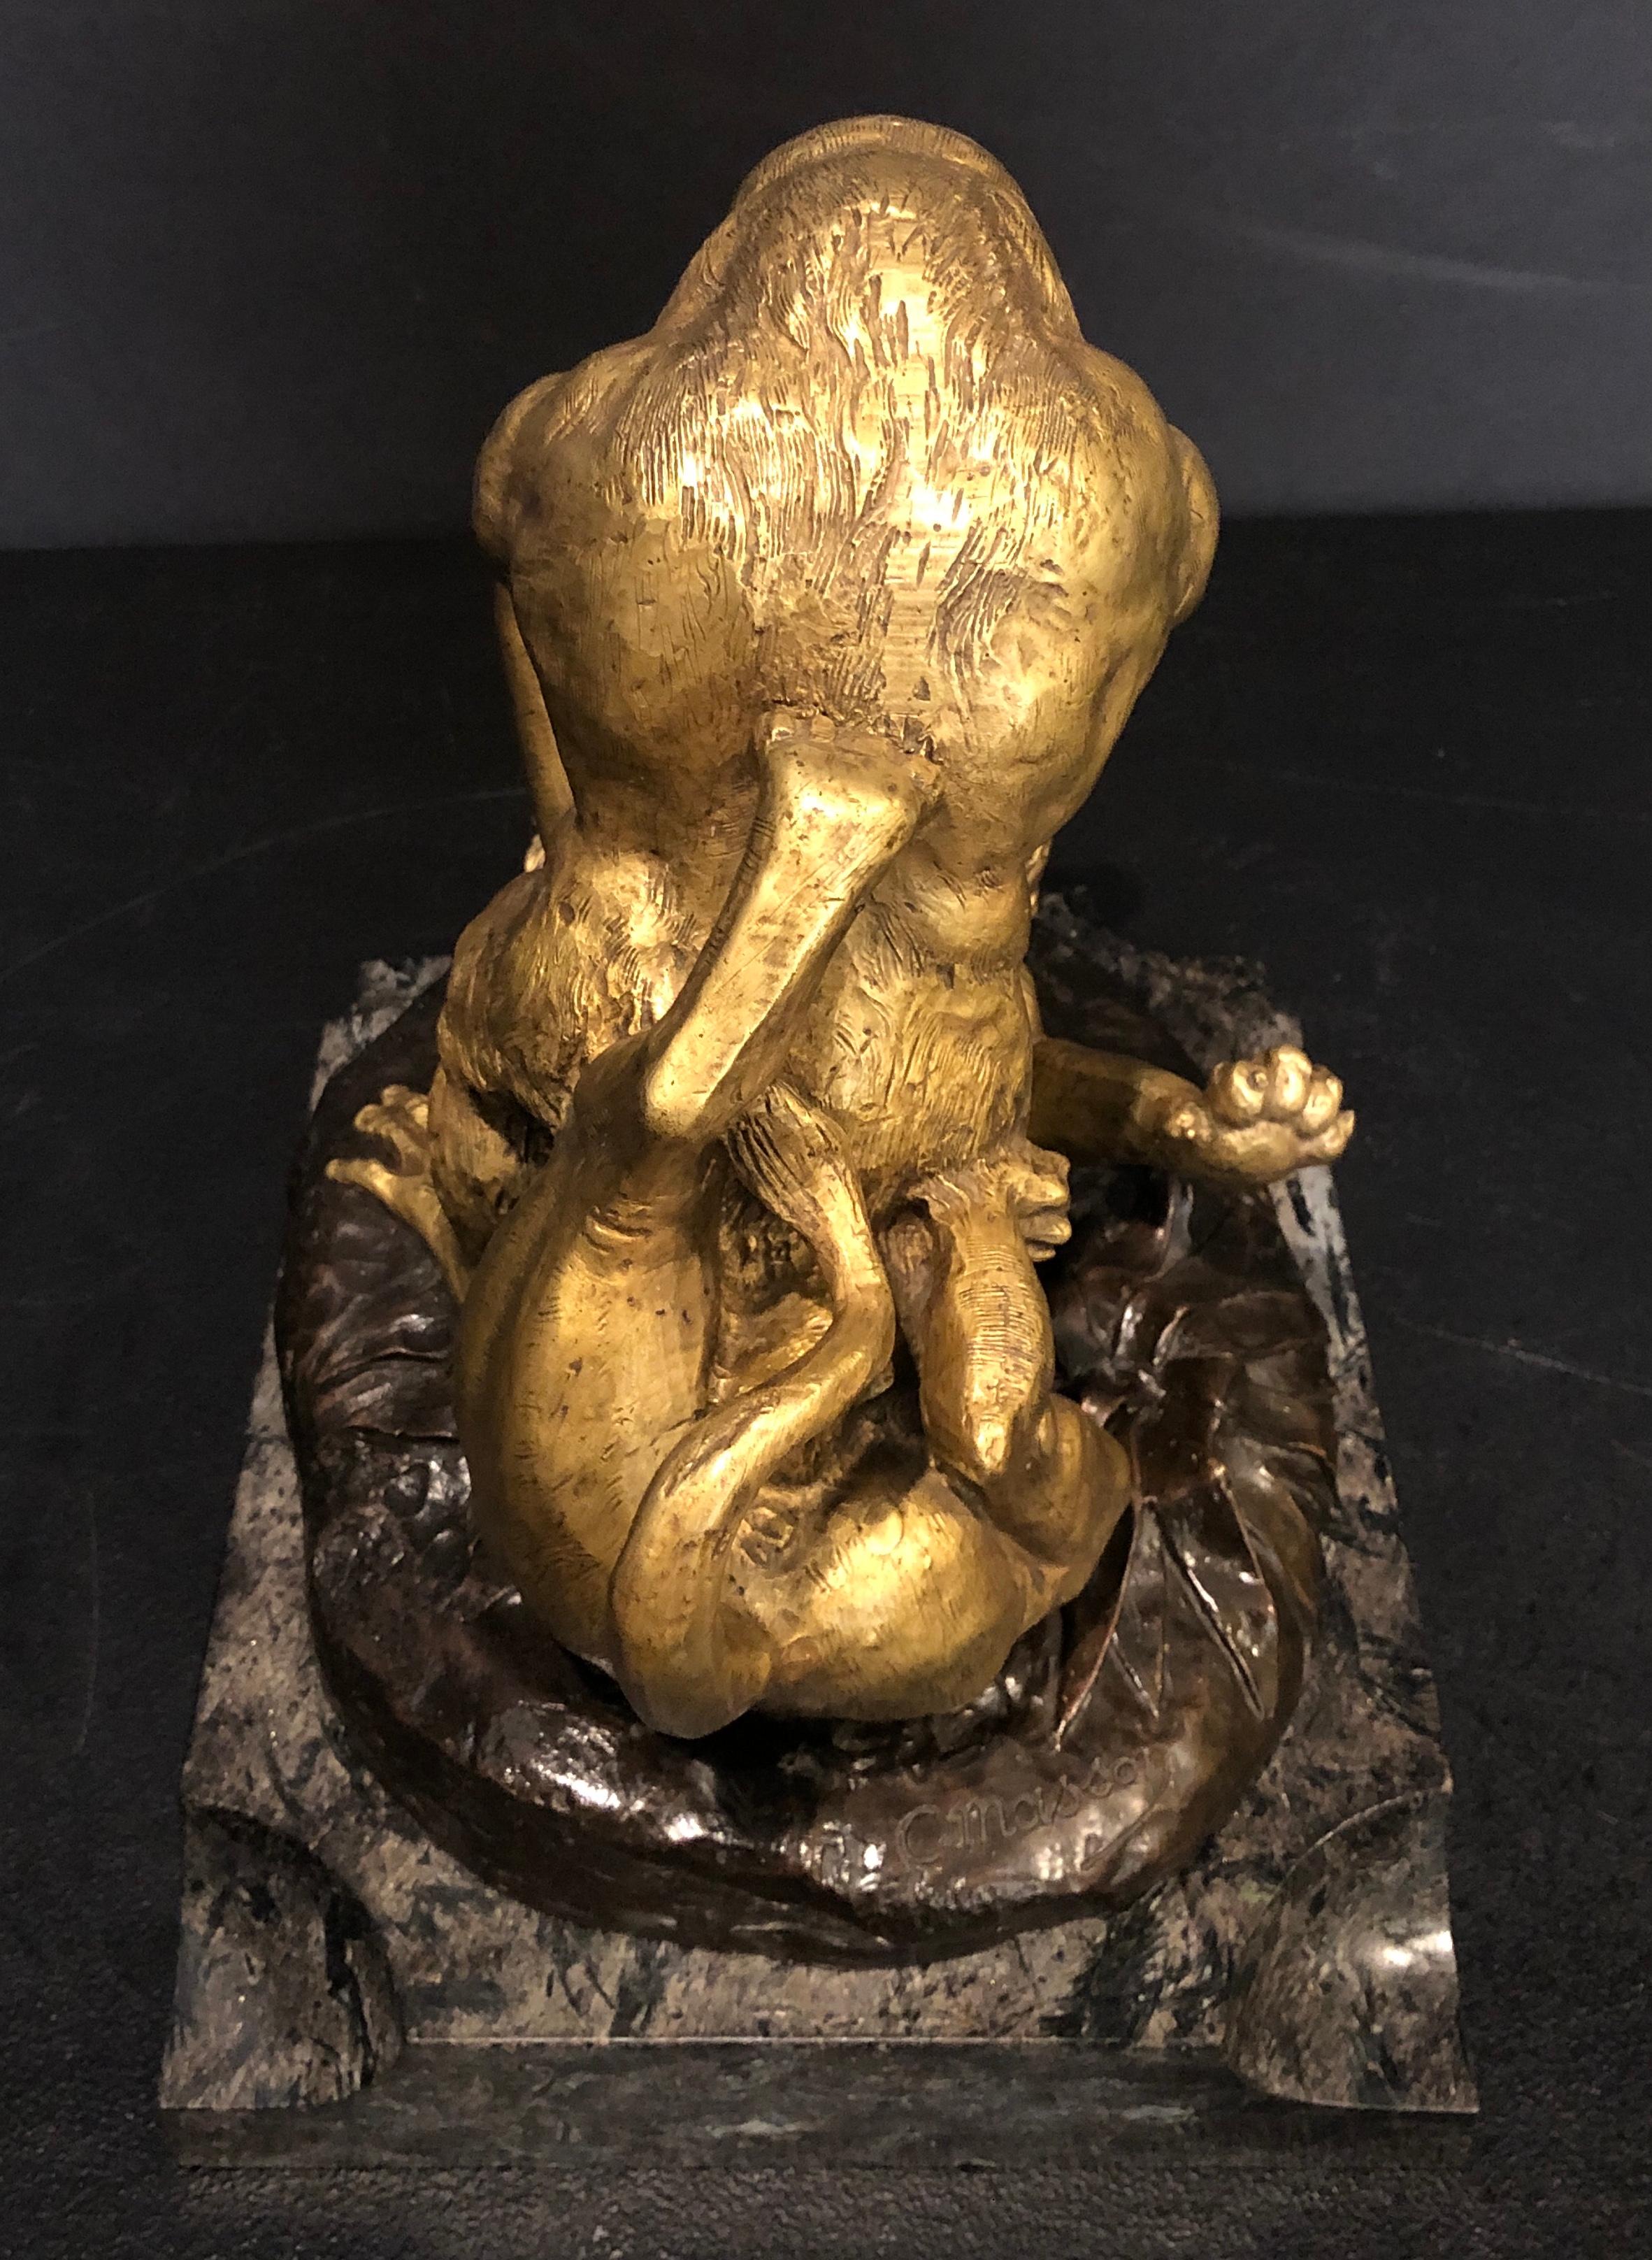 Signed Clovis Edmond Masson (1838-1913) bronze sculpture of gorilla in battle with lion. 19th century gilt and patinated bronze mounted on marble base. French 19th century.